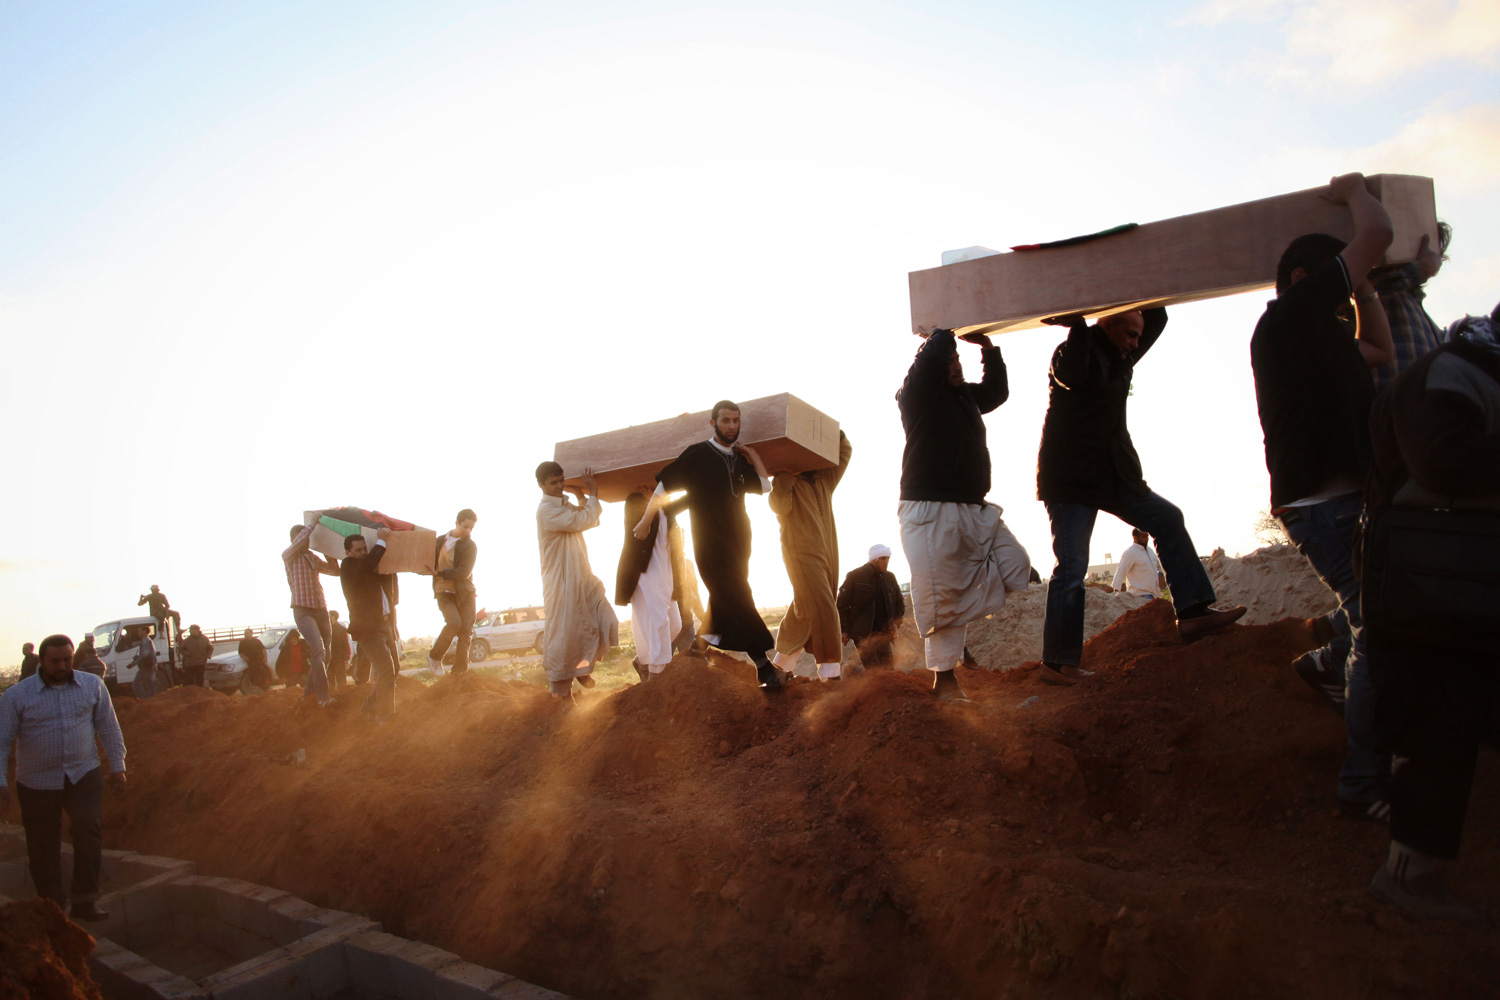 March 5, 2012. Libyan men carry coffins of victims, discovered in a mass grave, at a funeral in Benghazi, Libya.